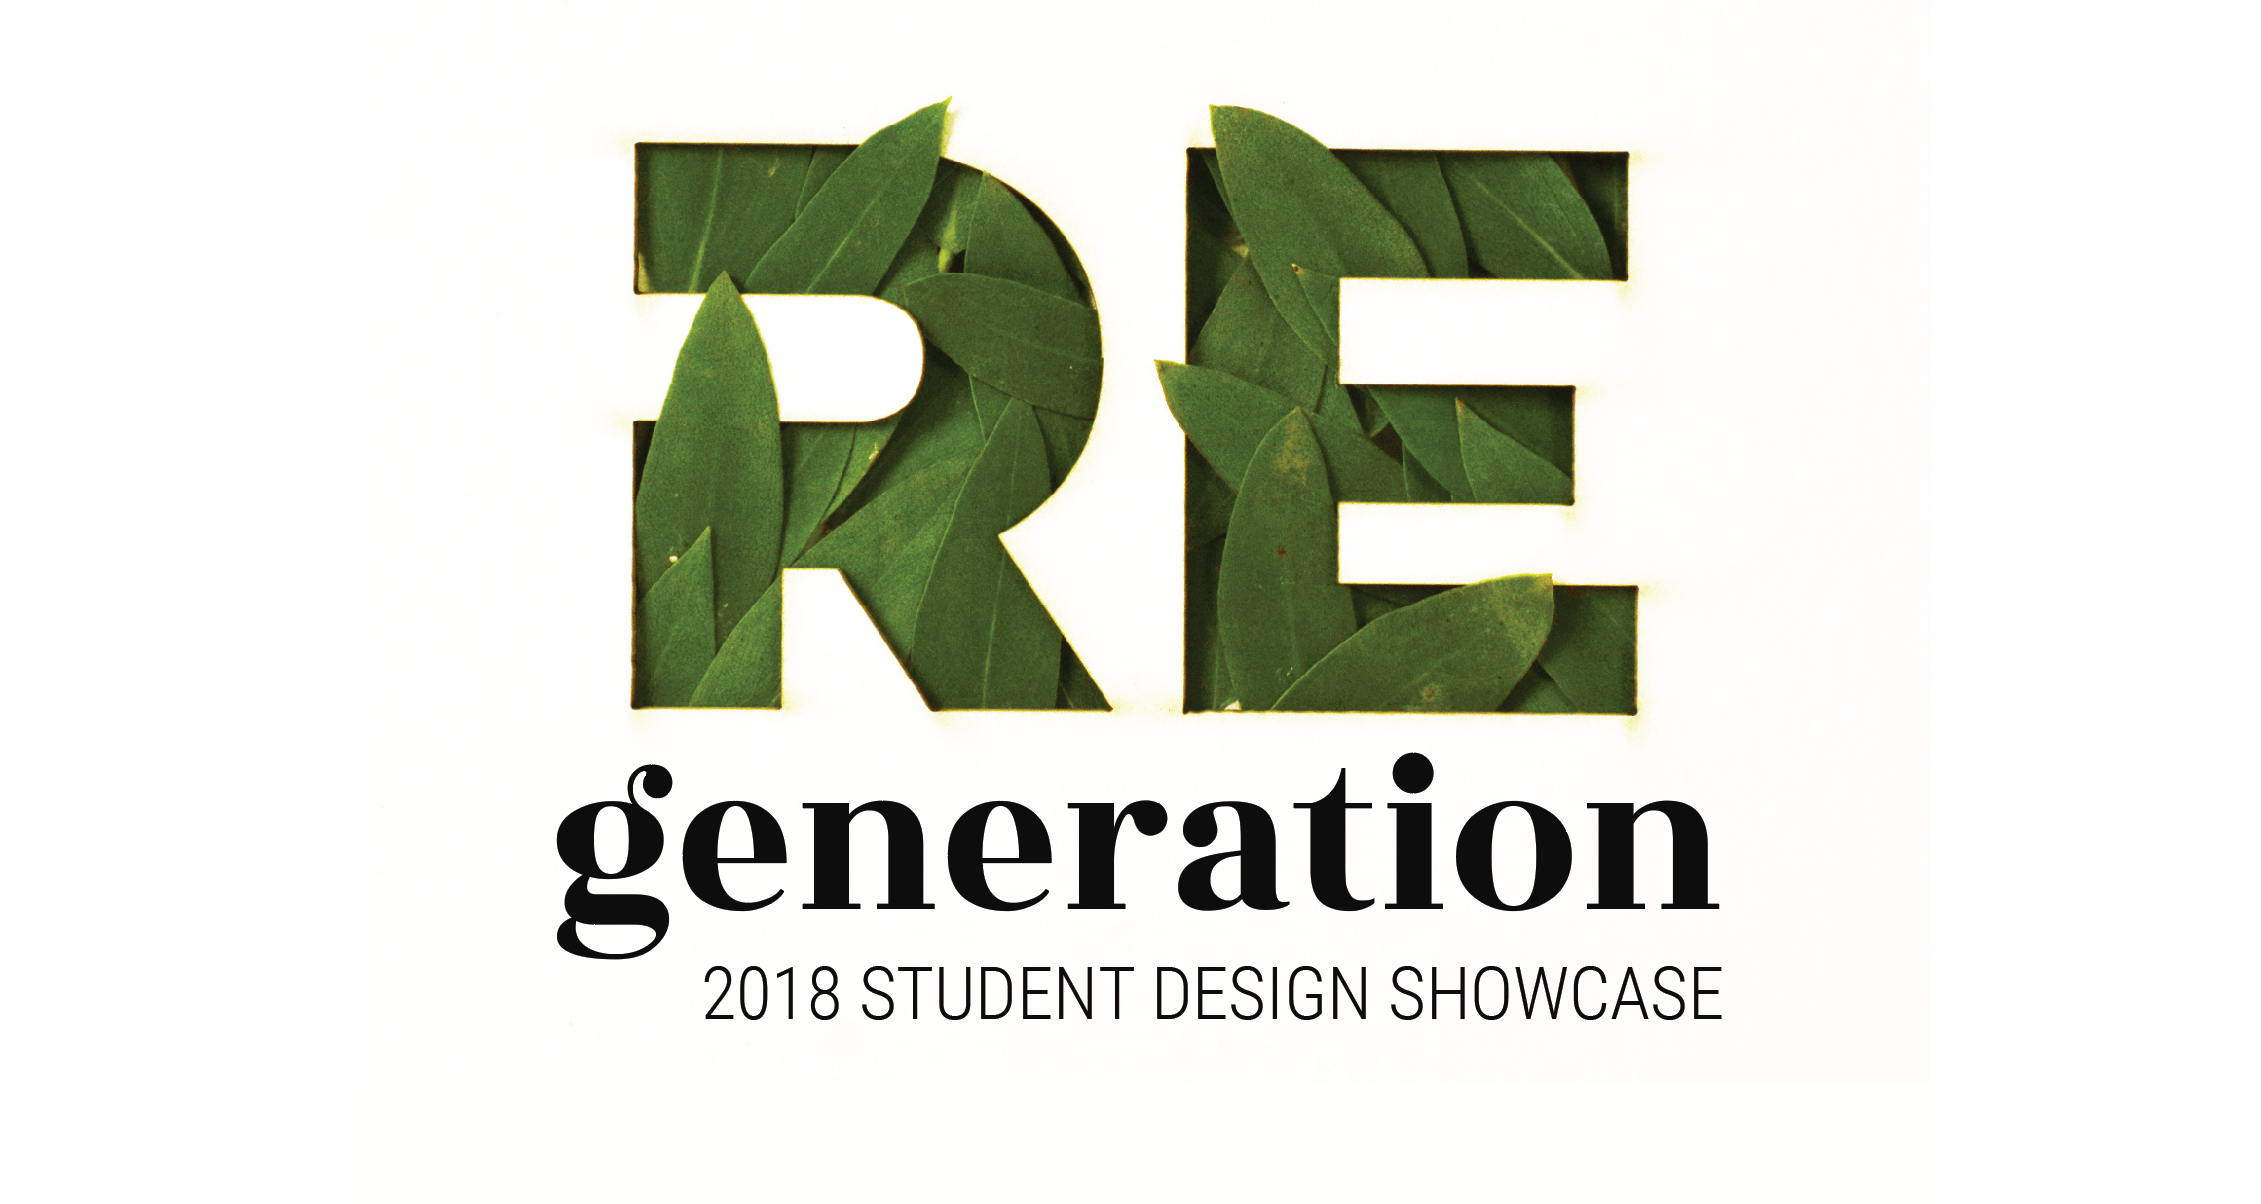 green leaves coming through letters cut from a white background, text reads "RE generation 2018 student design showcase"